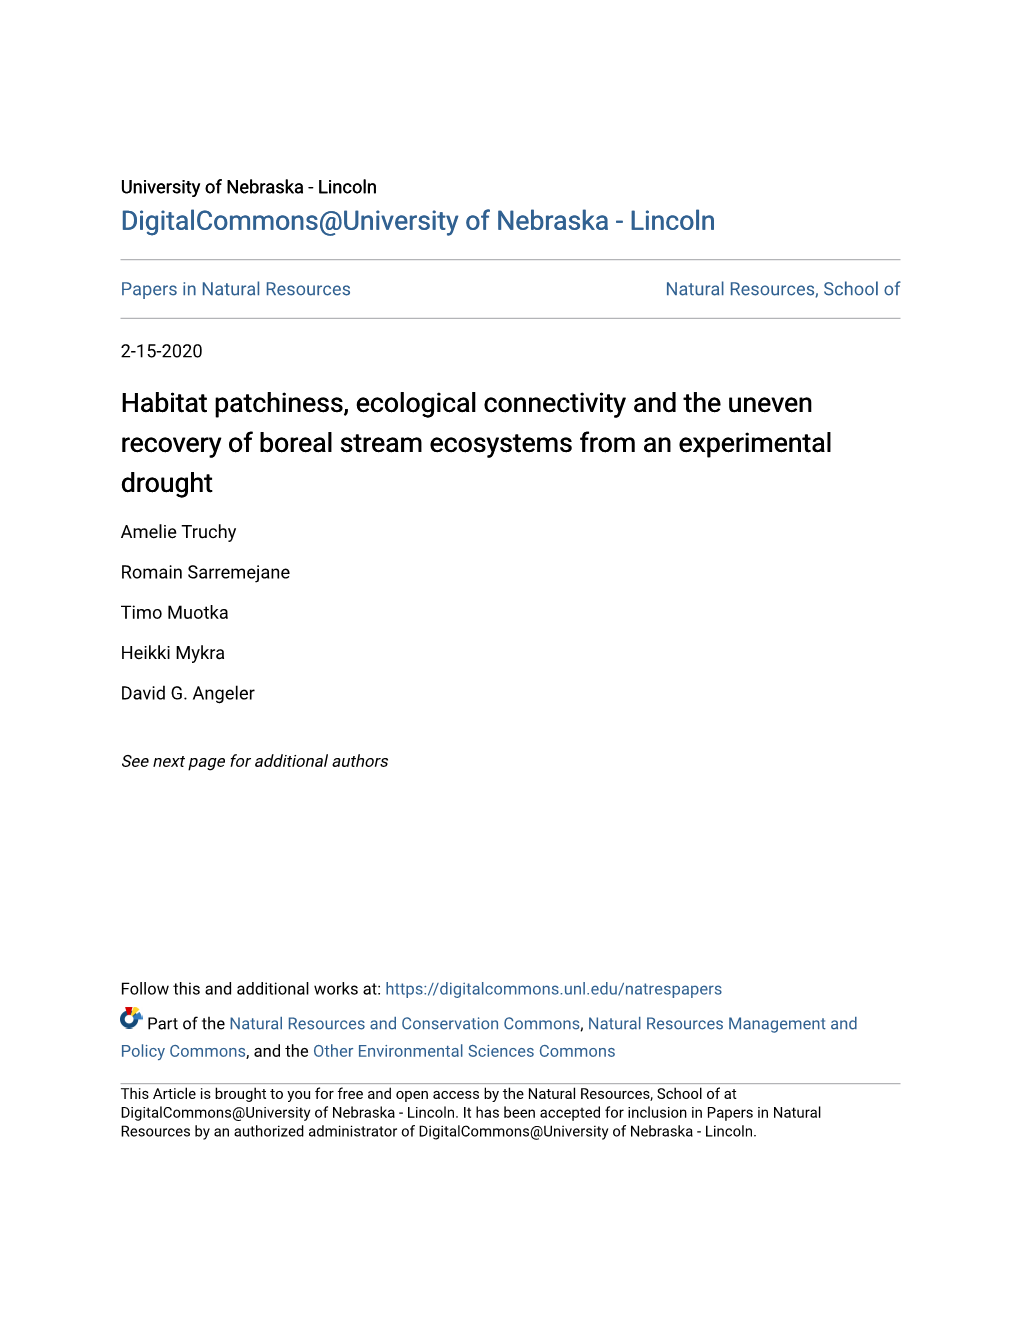 Habitat Patchiness, Ecological Connectivity and the Uneven Recovery of Boreal Stream Ecosystems from an Experimental Drought